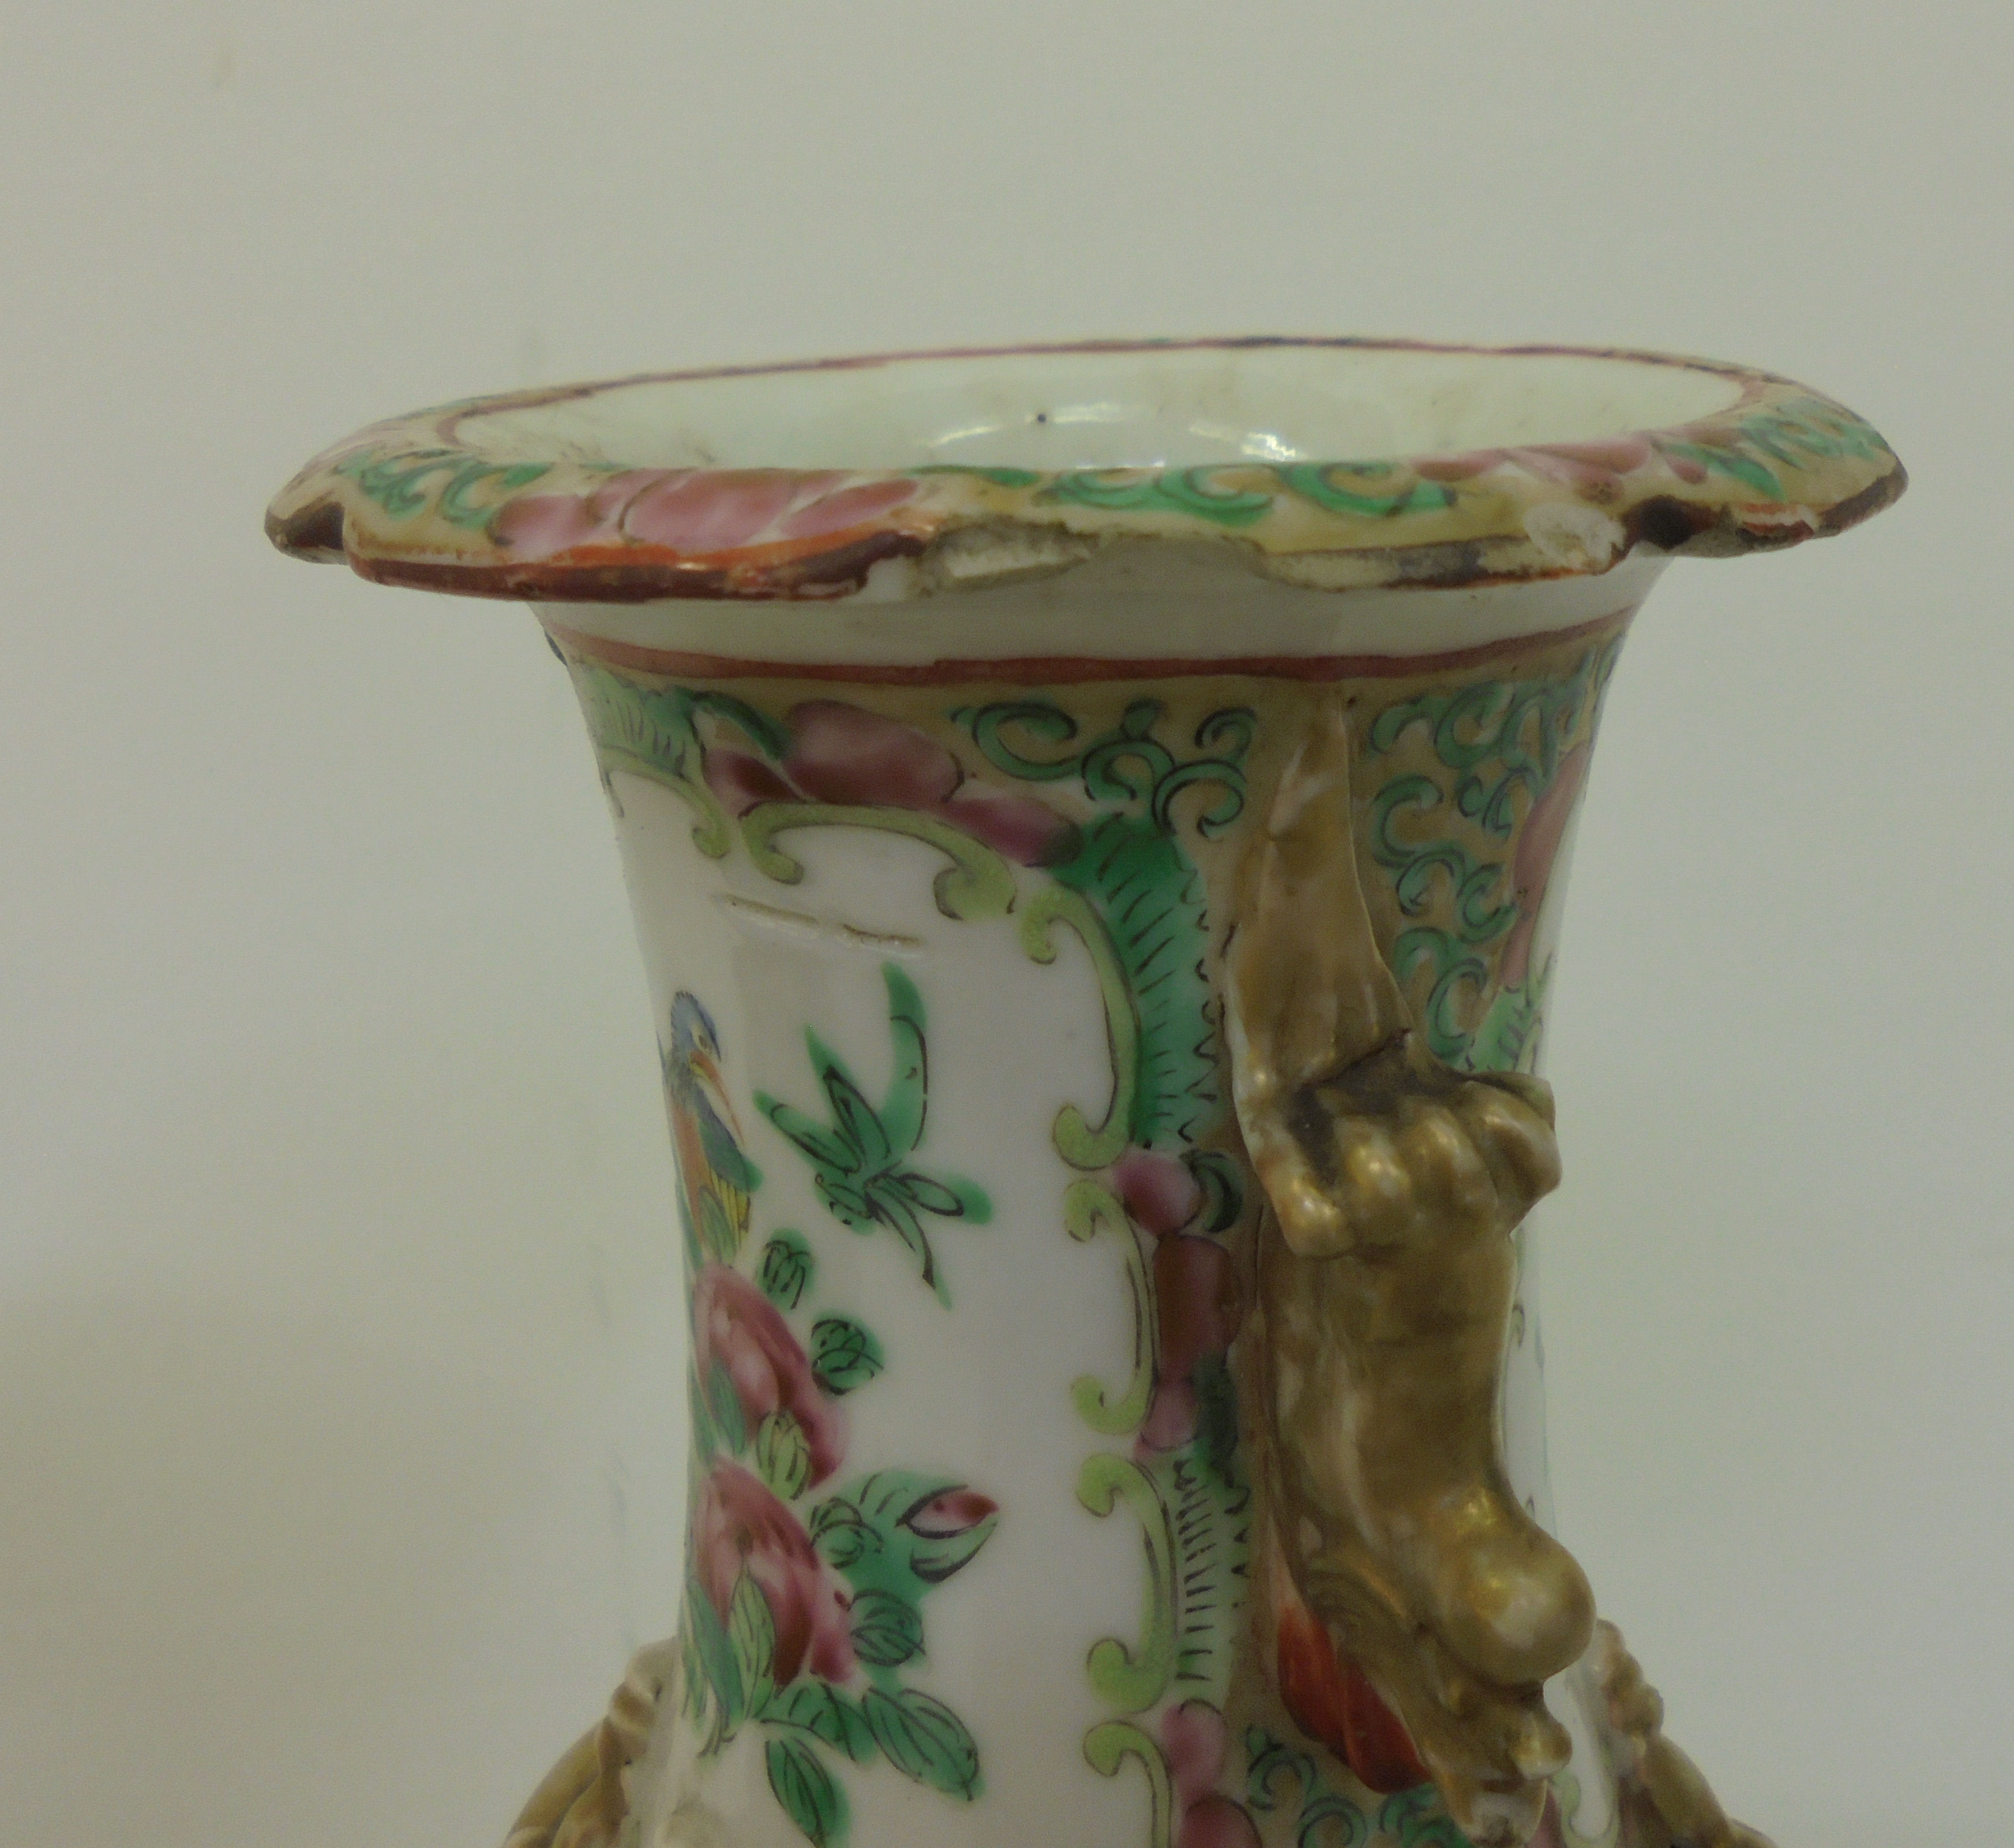 Two similar Chinese Canton Export porcelain vases with overlaid ornament, decorated in panels with - Image 6 of 9